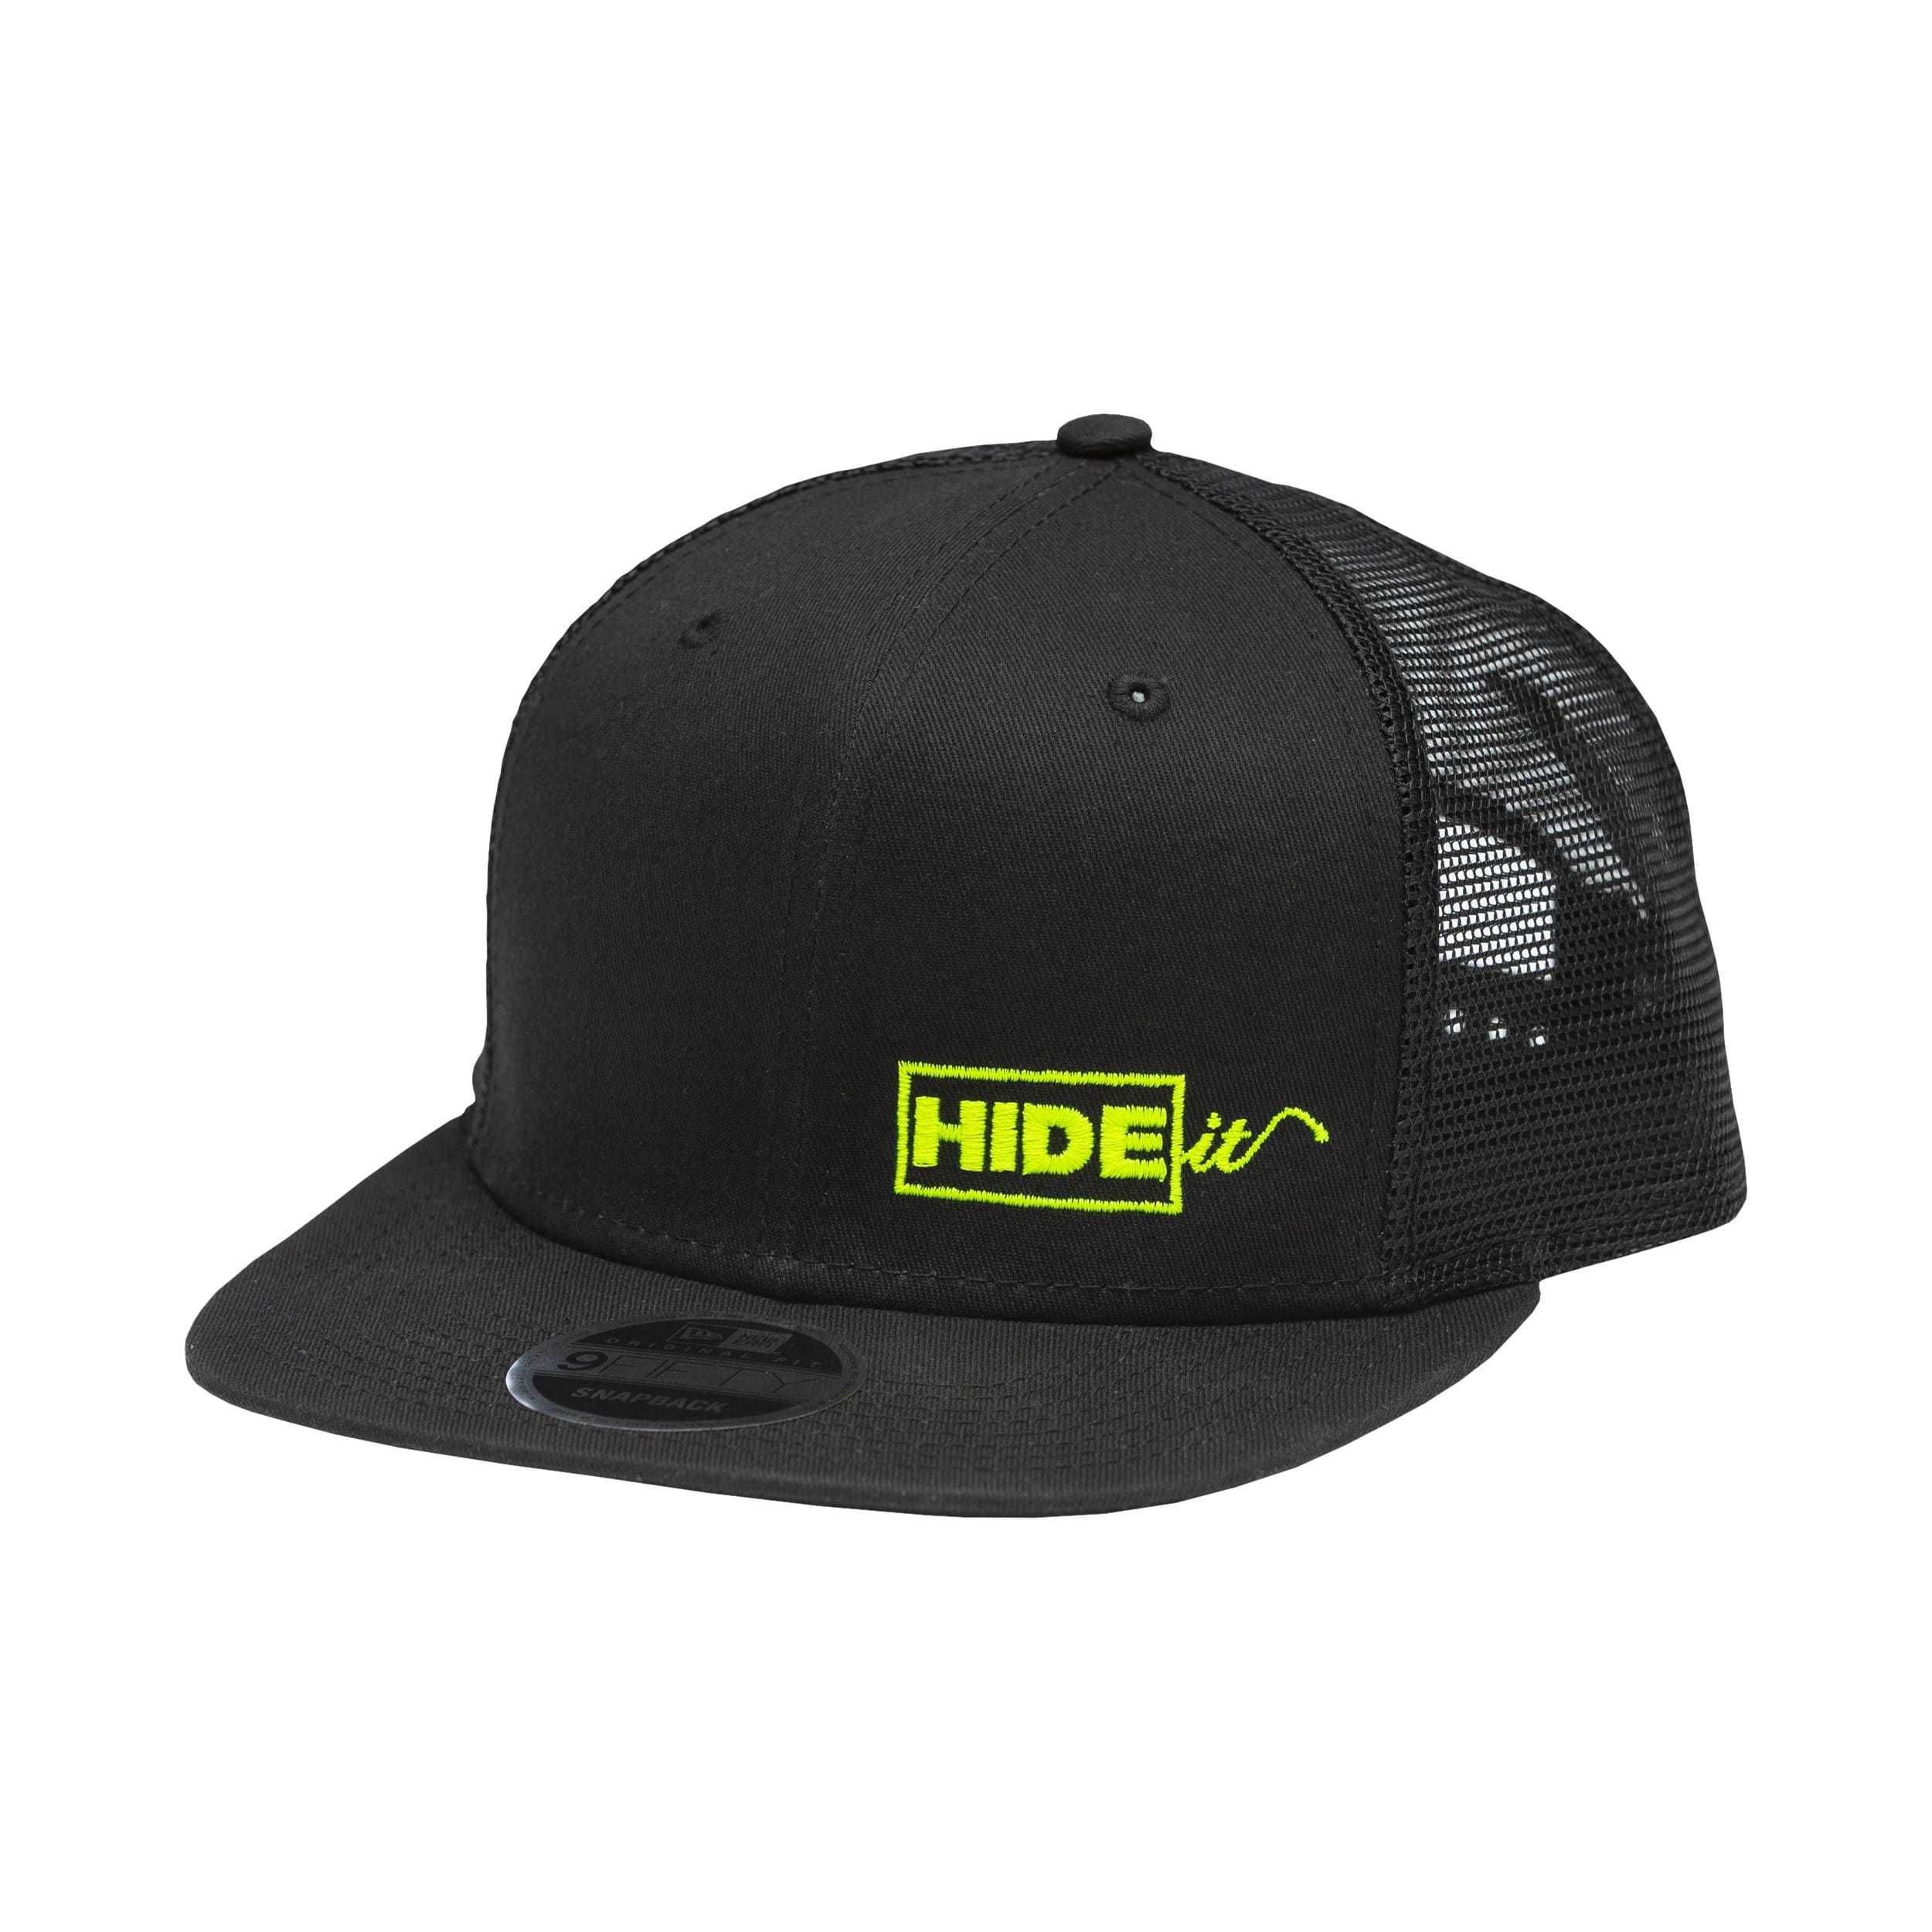 Black New Era 9fifty snapback with lime green HIDEit logo in bottom right.